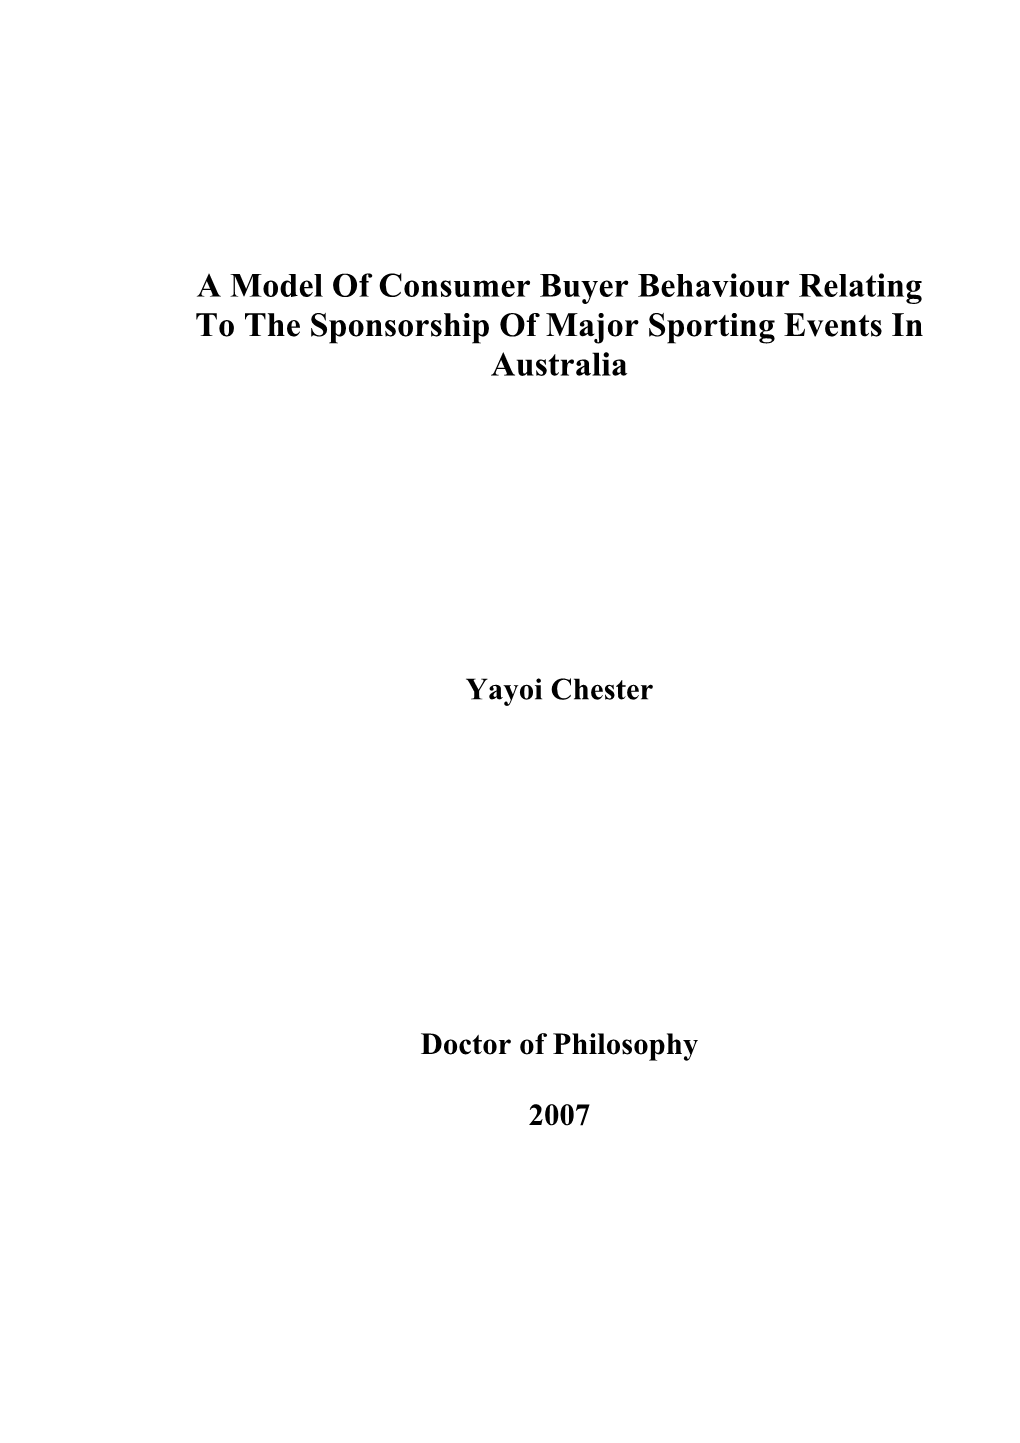 A Model of Consumer Buyer Behaviour Relating to the Sponsorship of Major Sporting Events in Australia